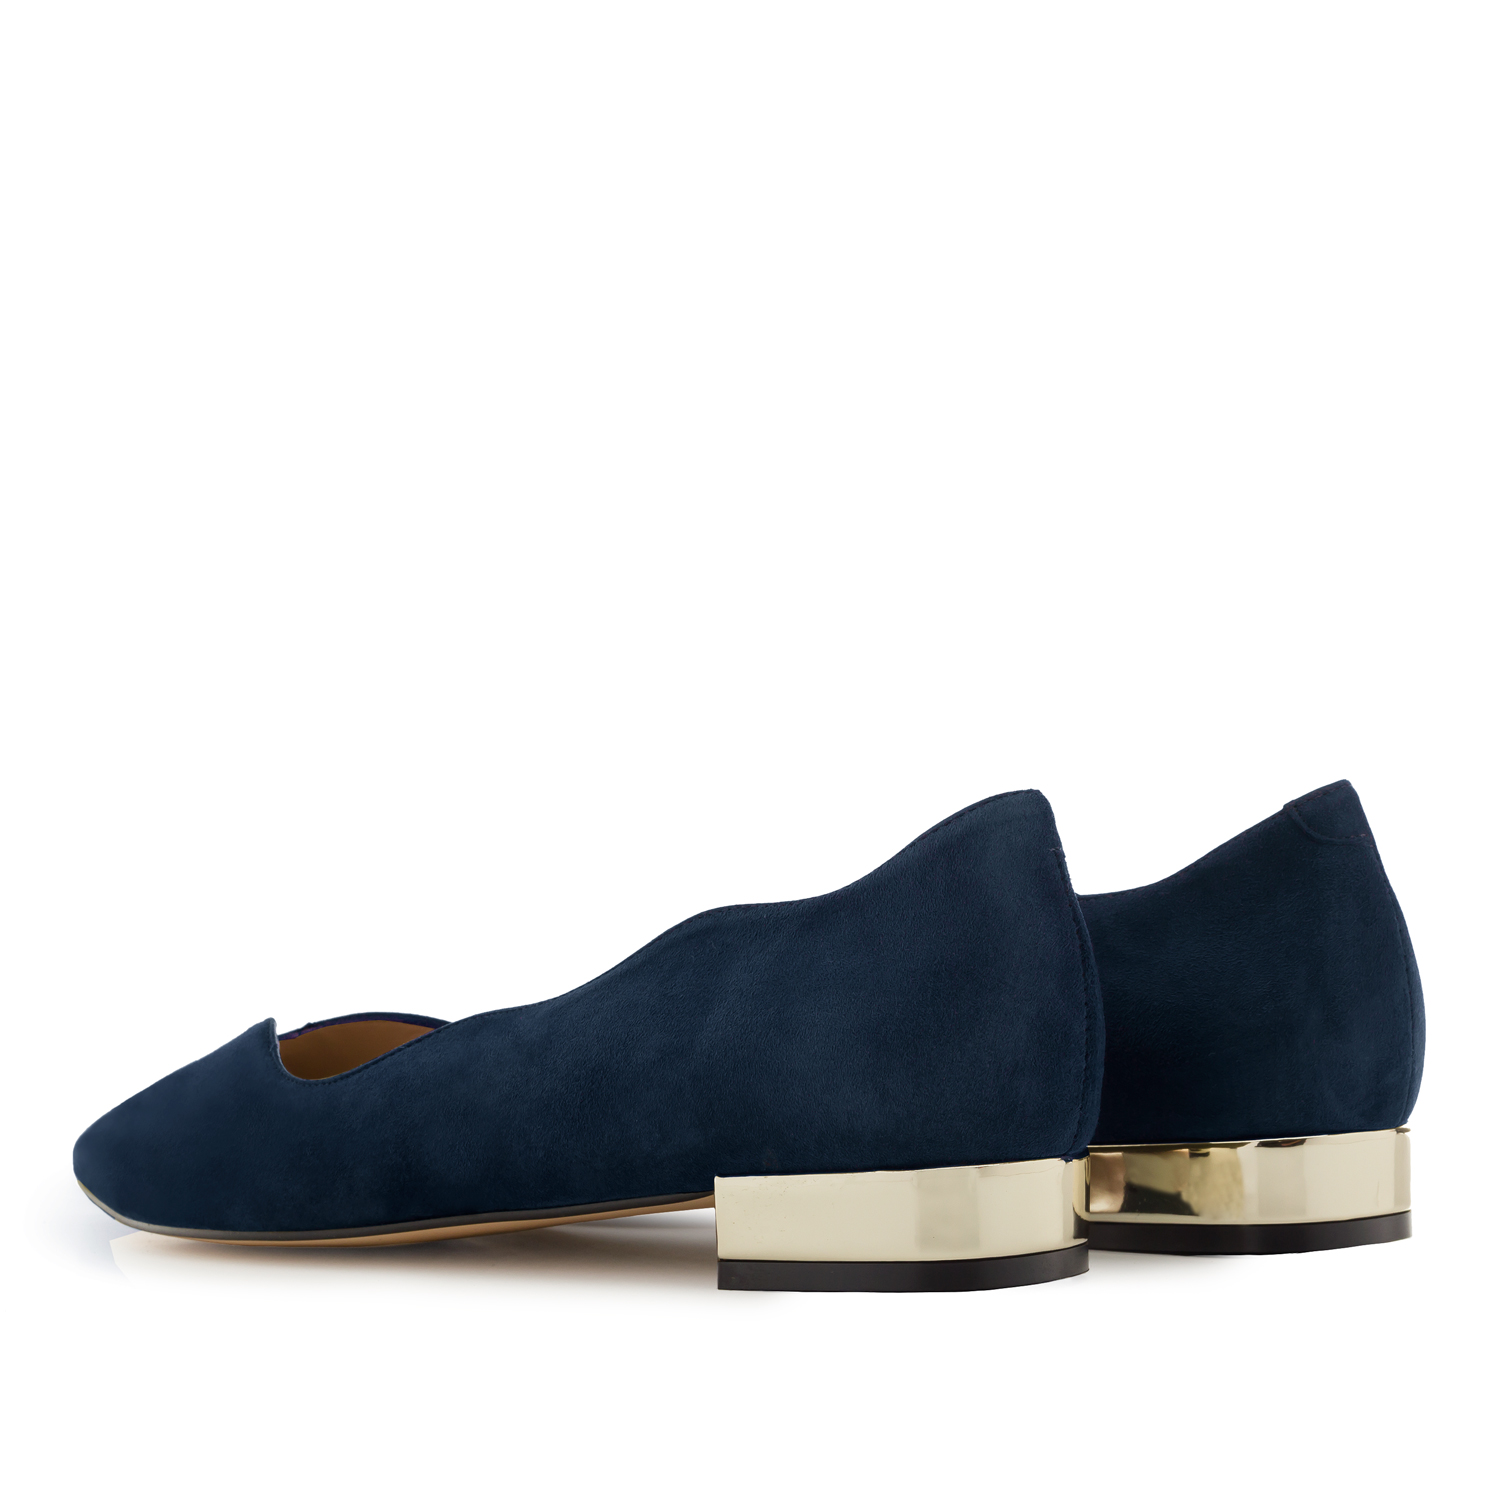 Waved Upper Ballet Flats in Navy Nappa Leather 